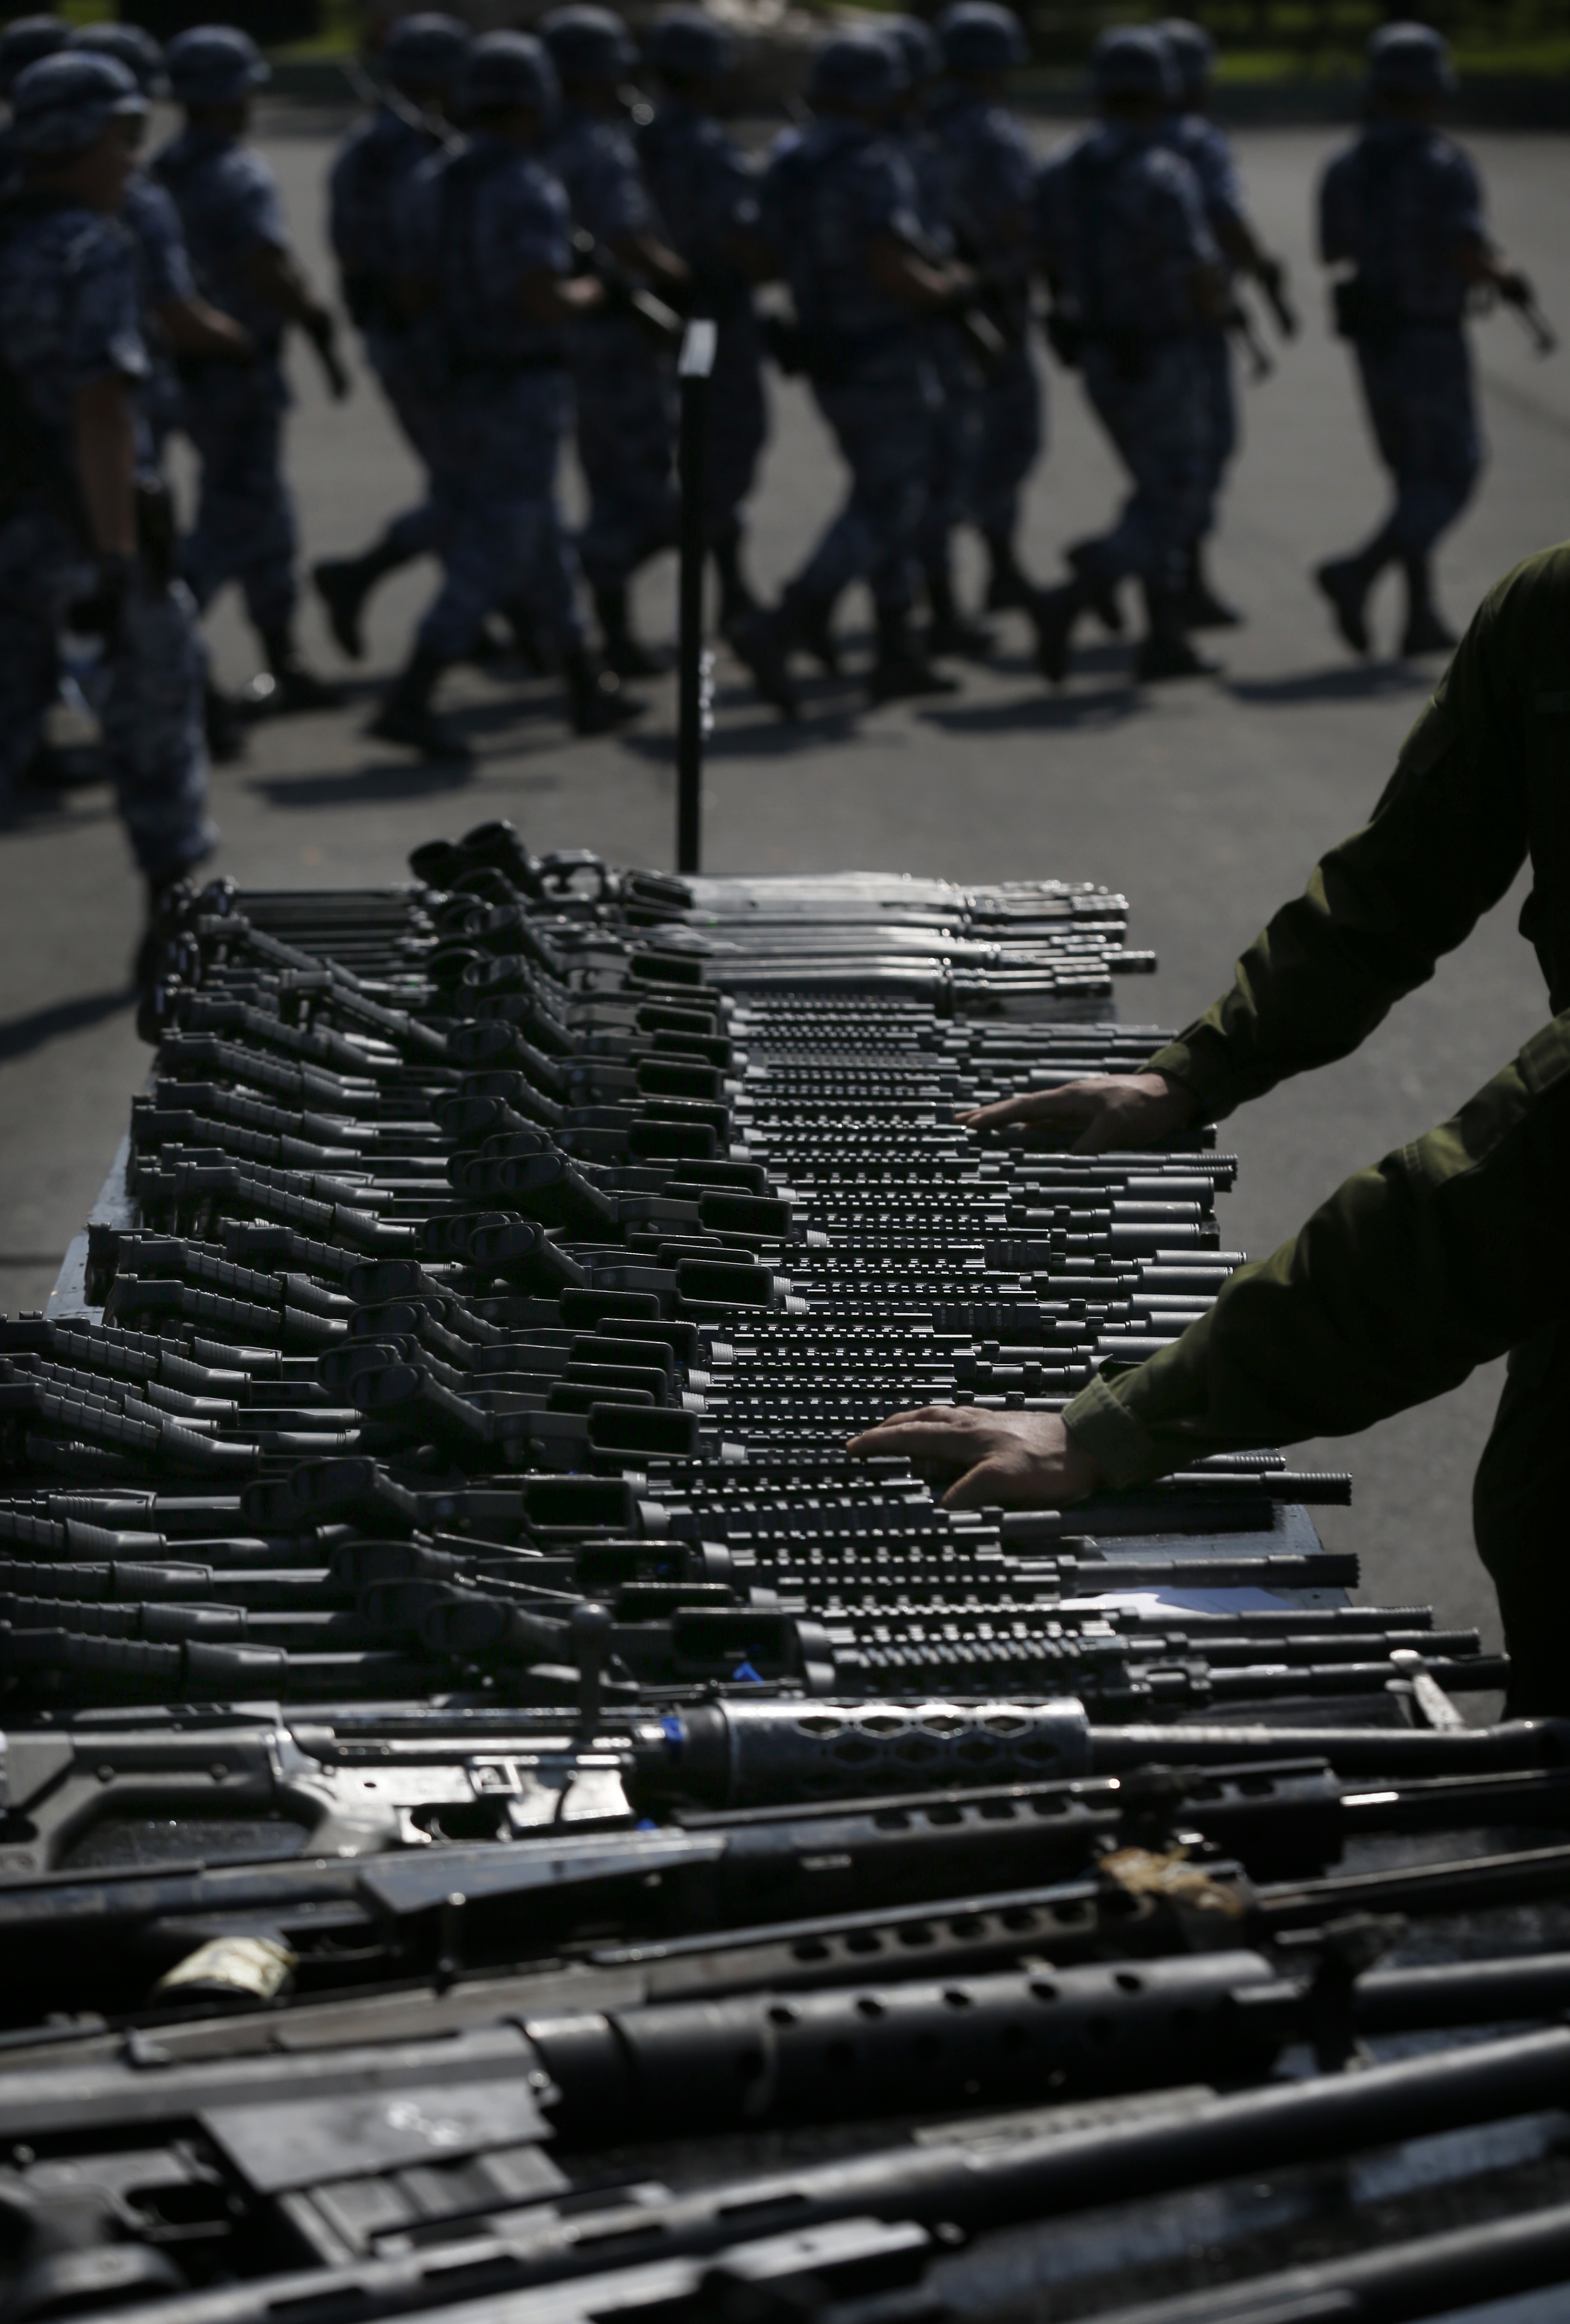 Weapons slated for destruction are displayed by the Mexican Army, in Mexico City, Tuesday, Aug. 1, 2017. The weapons were confiscated from organized crime and civilians who turned them in. (AP Photo/Marco Ugarte)